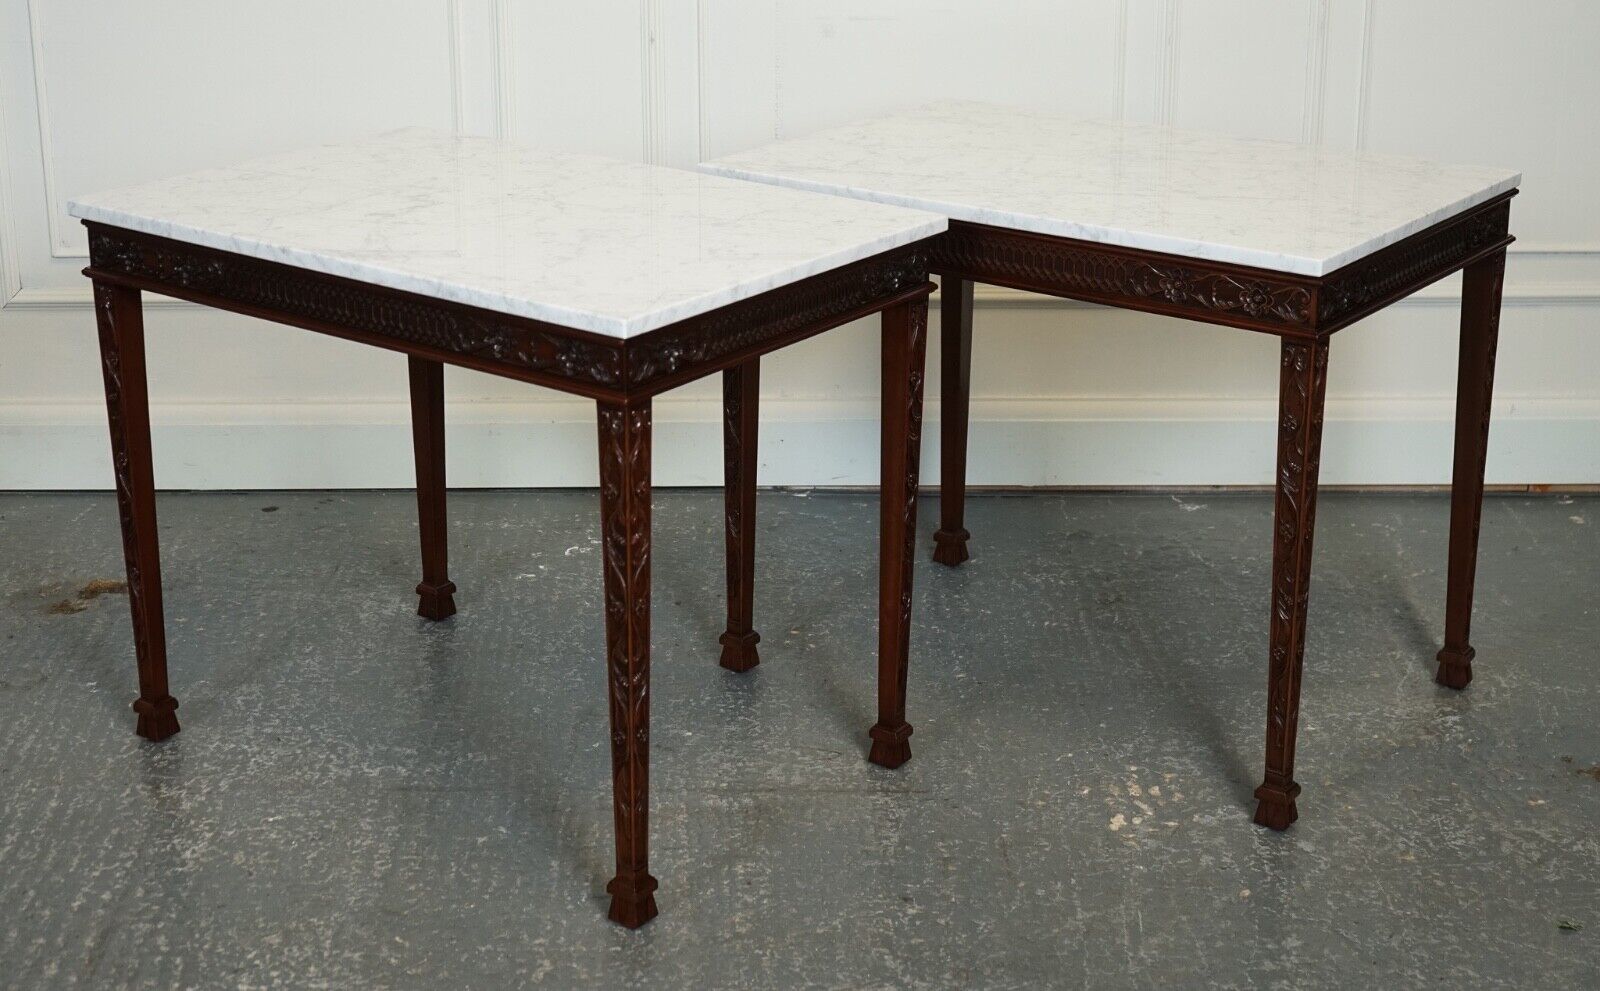 PAIR OF CHIPPENDALE STYLE CONSOLE TABLES WITH NEW WHITE CARRARA MARBLE TOPS